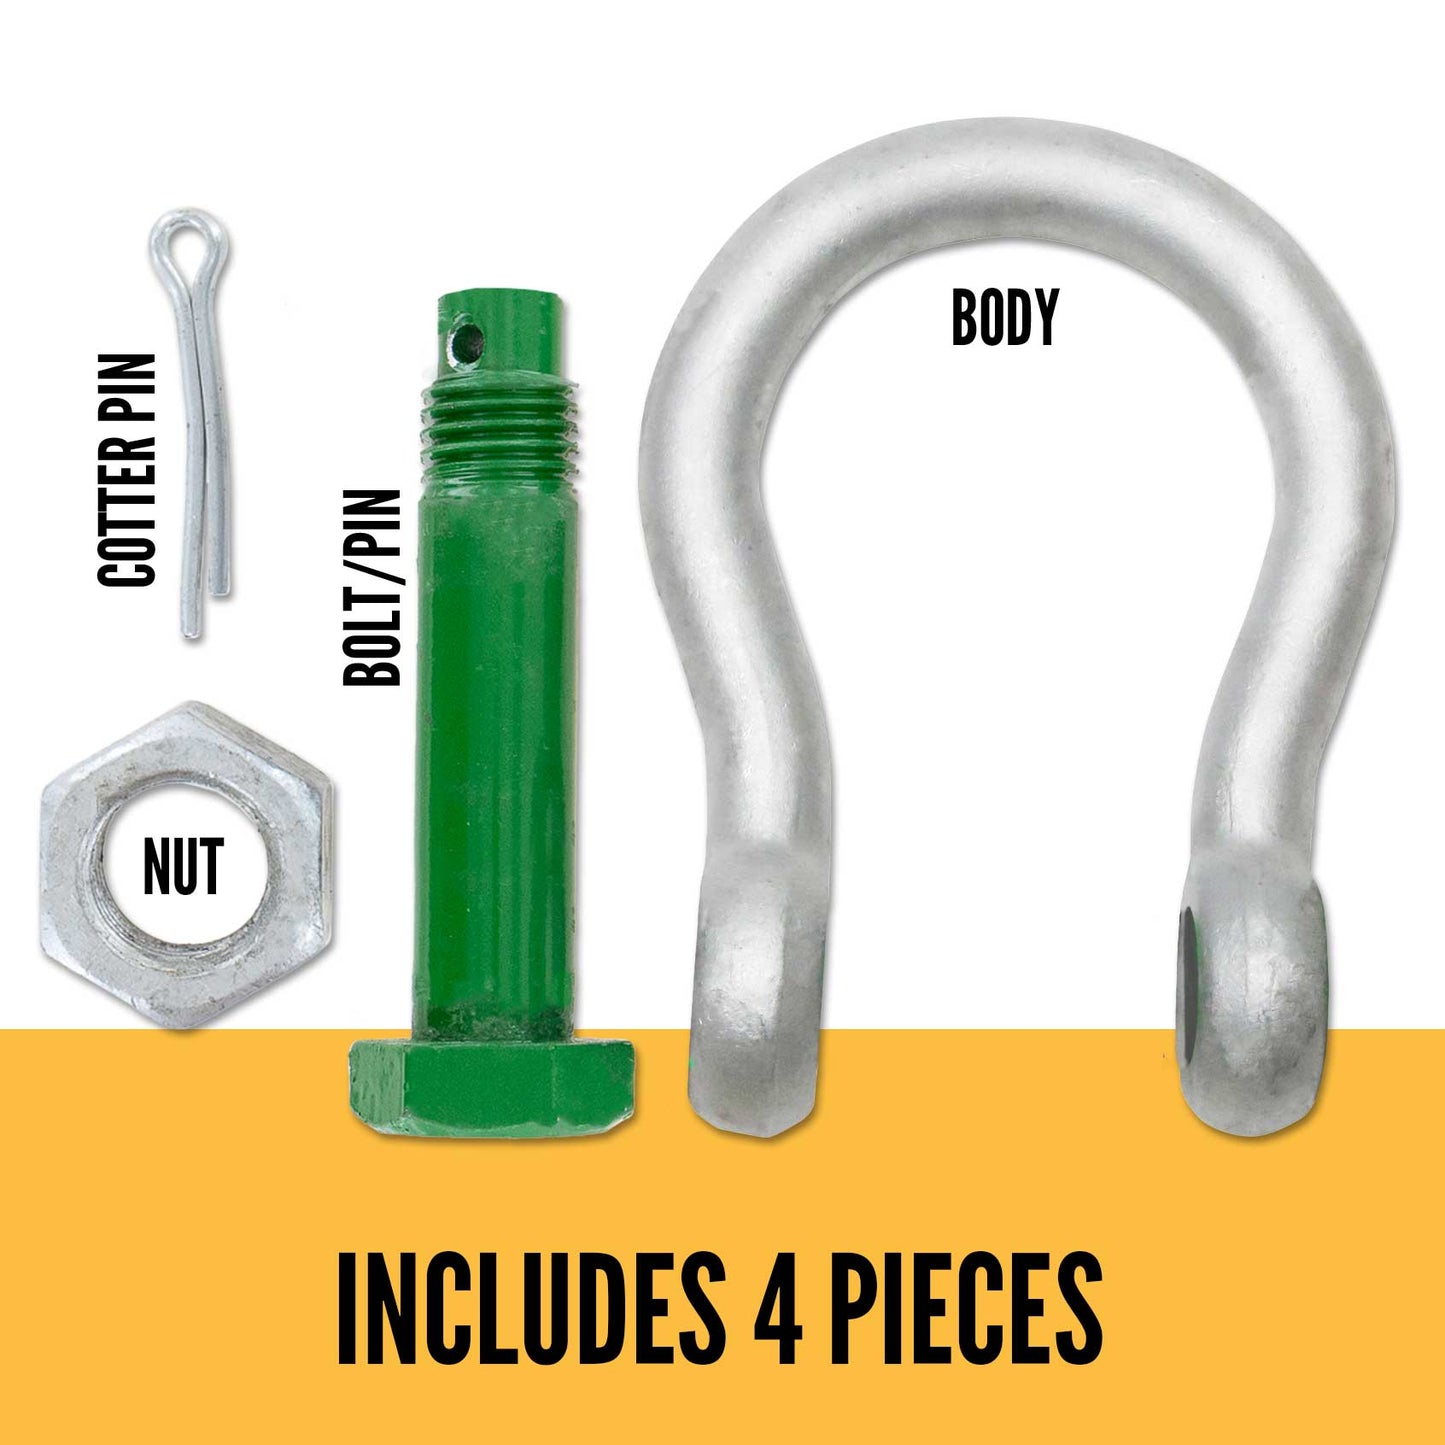 1" Van Beest Green Pin® Bolt Type Wide Mouth Towing Shackle | G-4263 - 6.5 Ton parts of a shackle